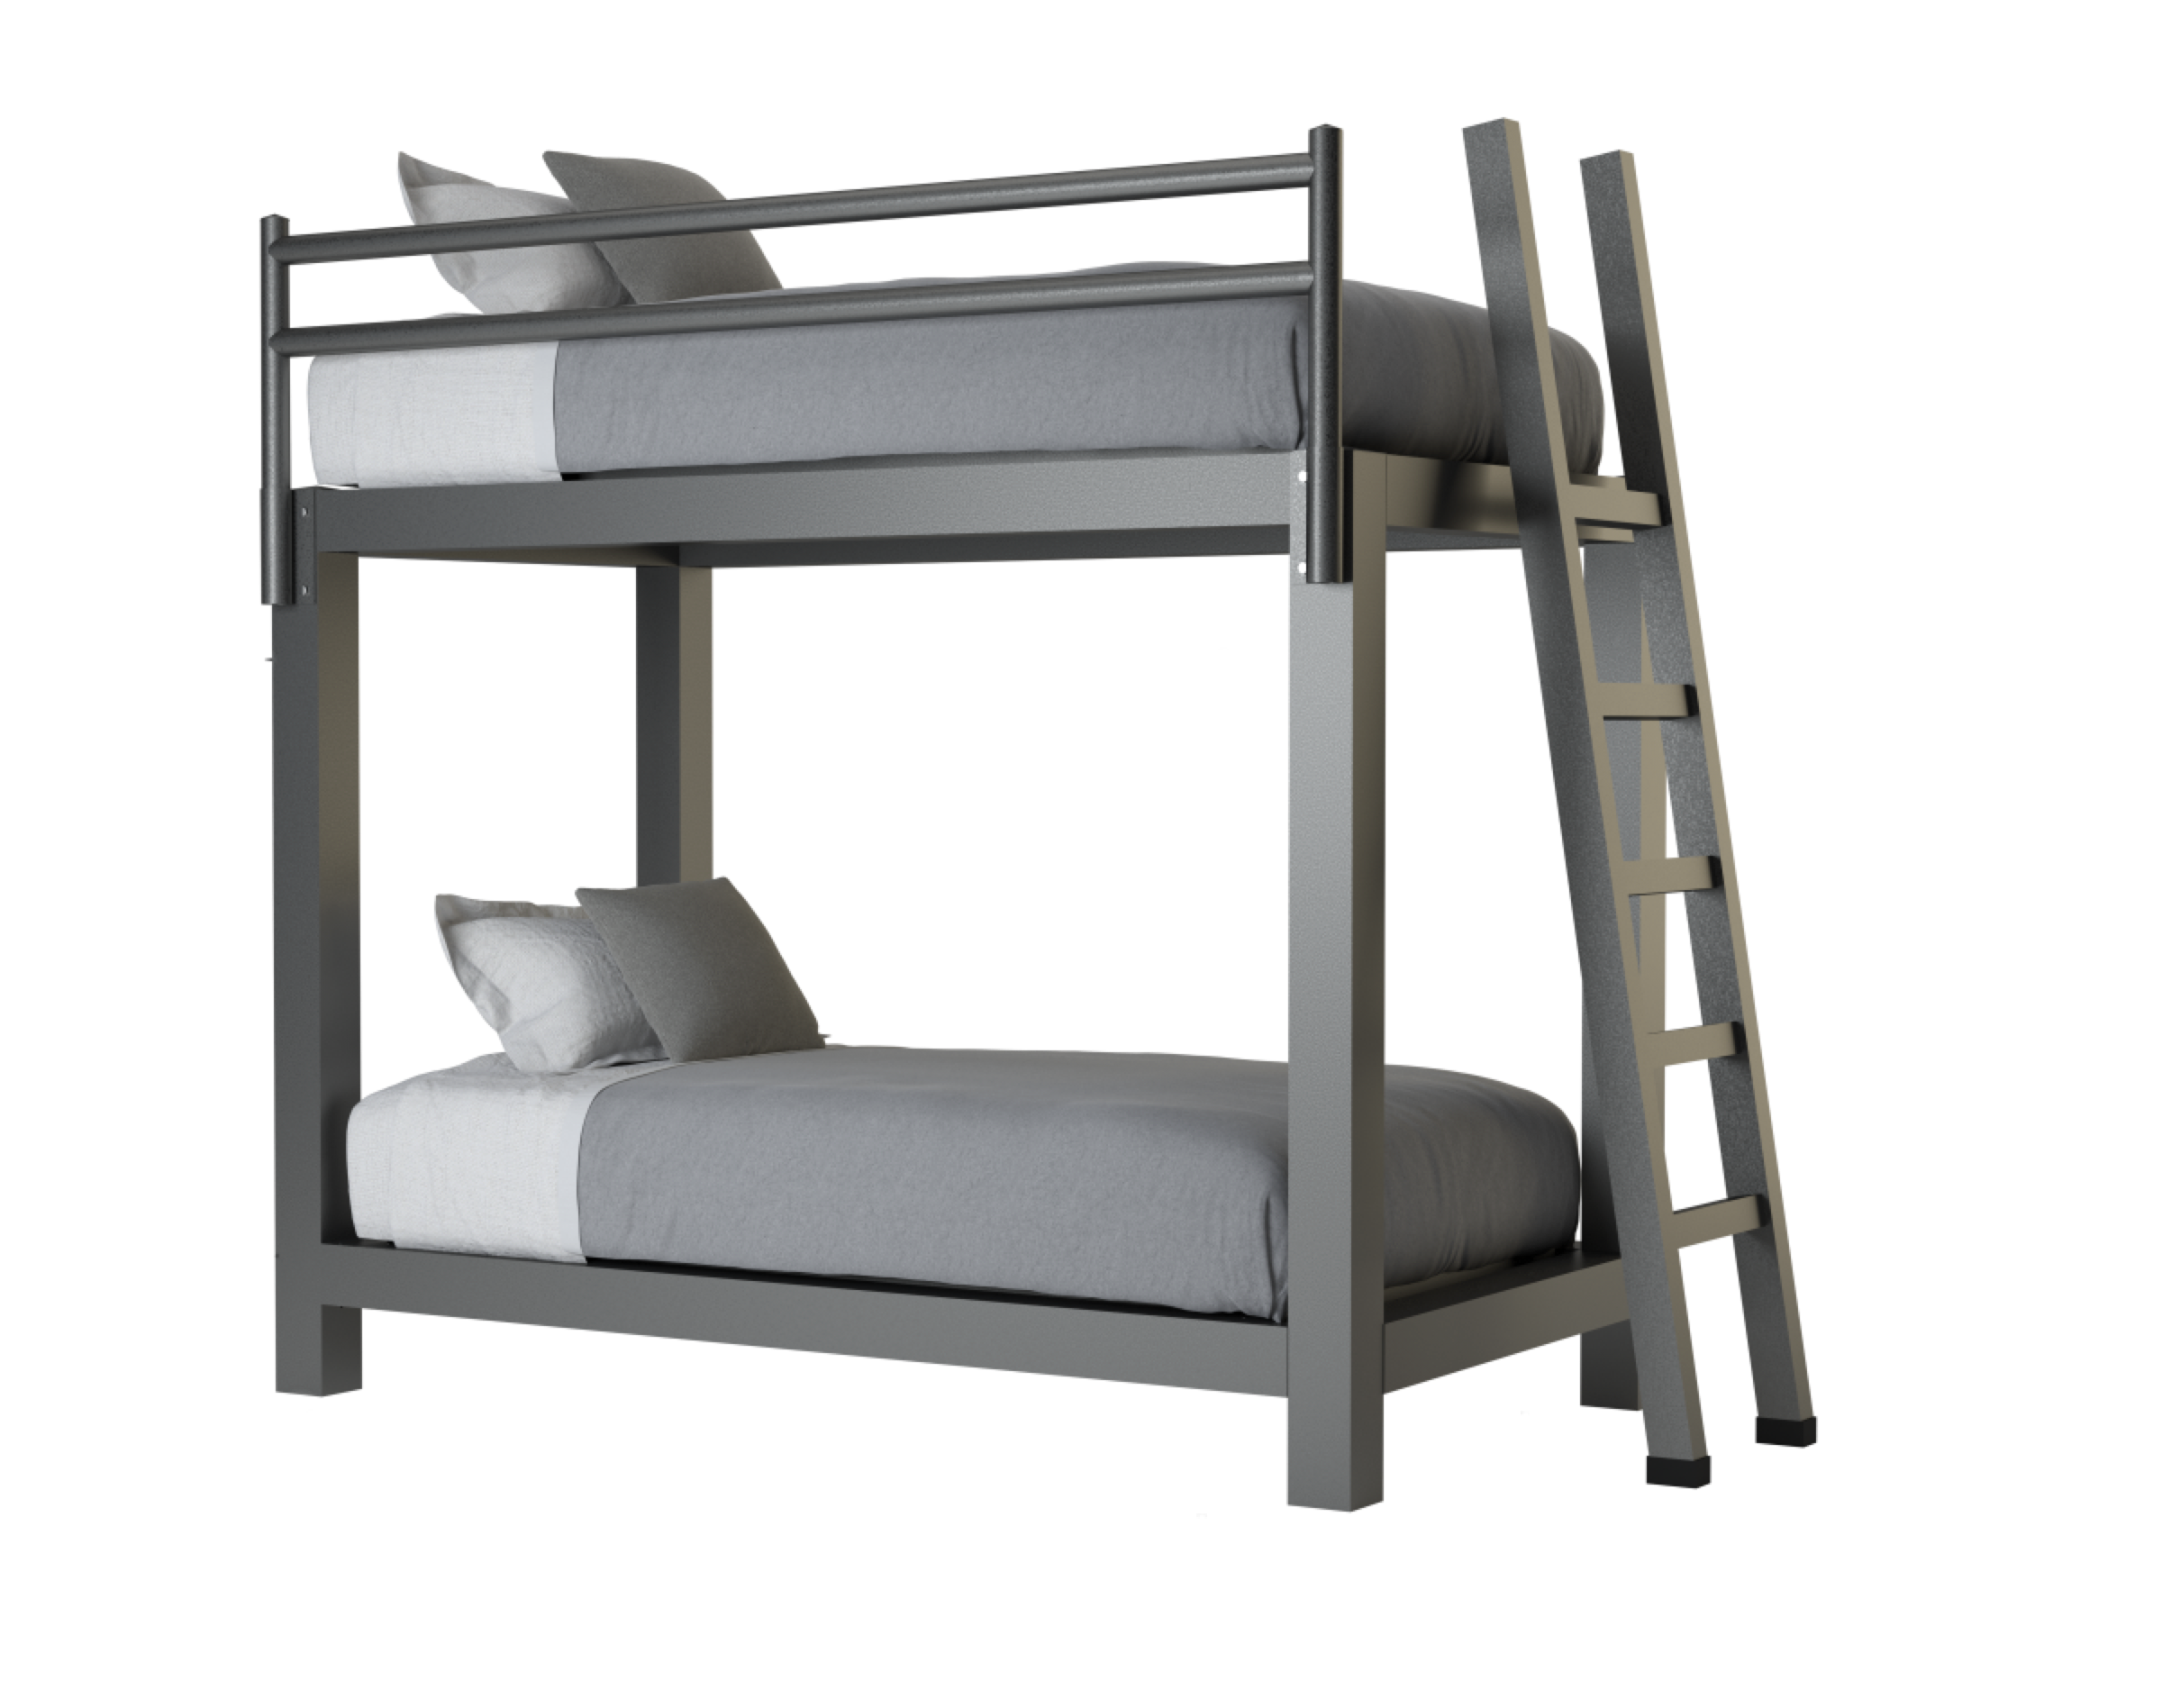 Twin Over Bunk Bed Bunkbeds Com, Is A Bunk Bed Mattress The Same Size As Twin